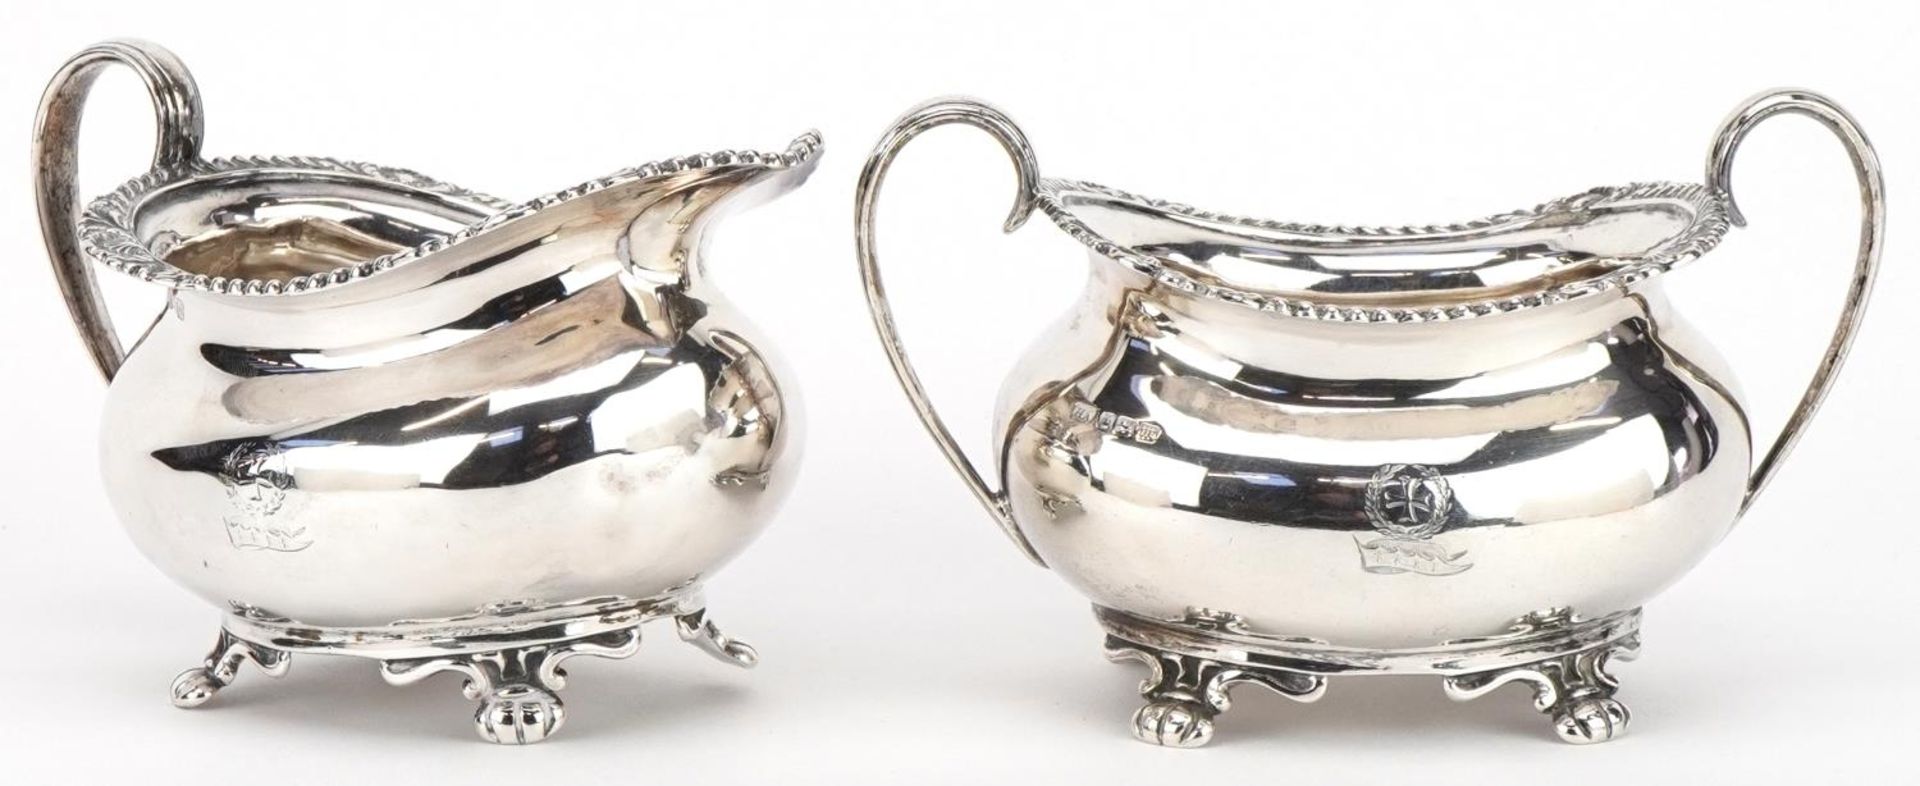 Atkin Brothers, Edwardian silver cream jug and matching sugar bowl with twin handles, the largest